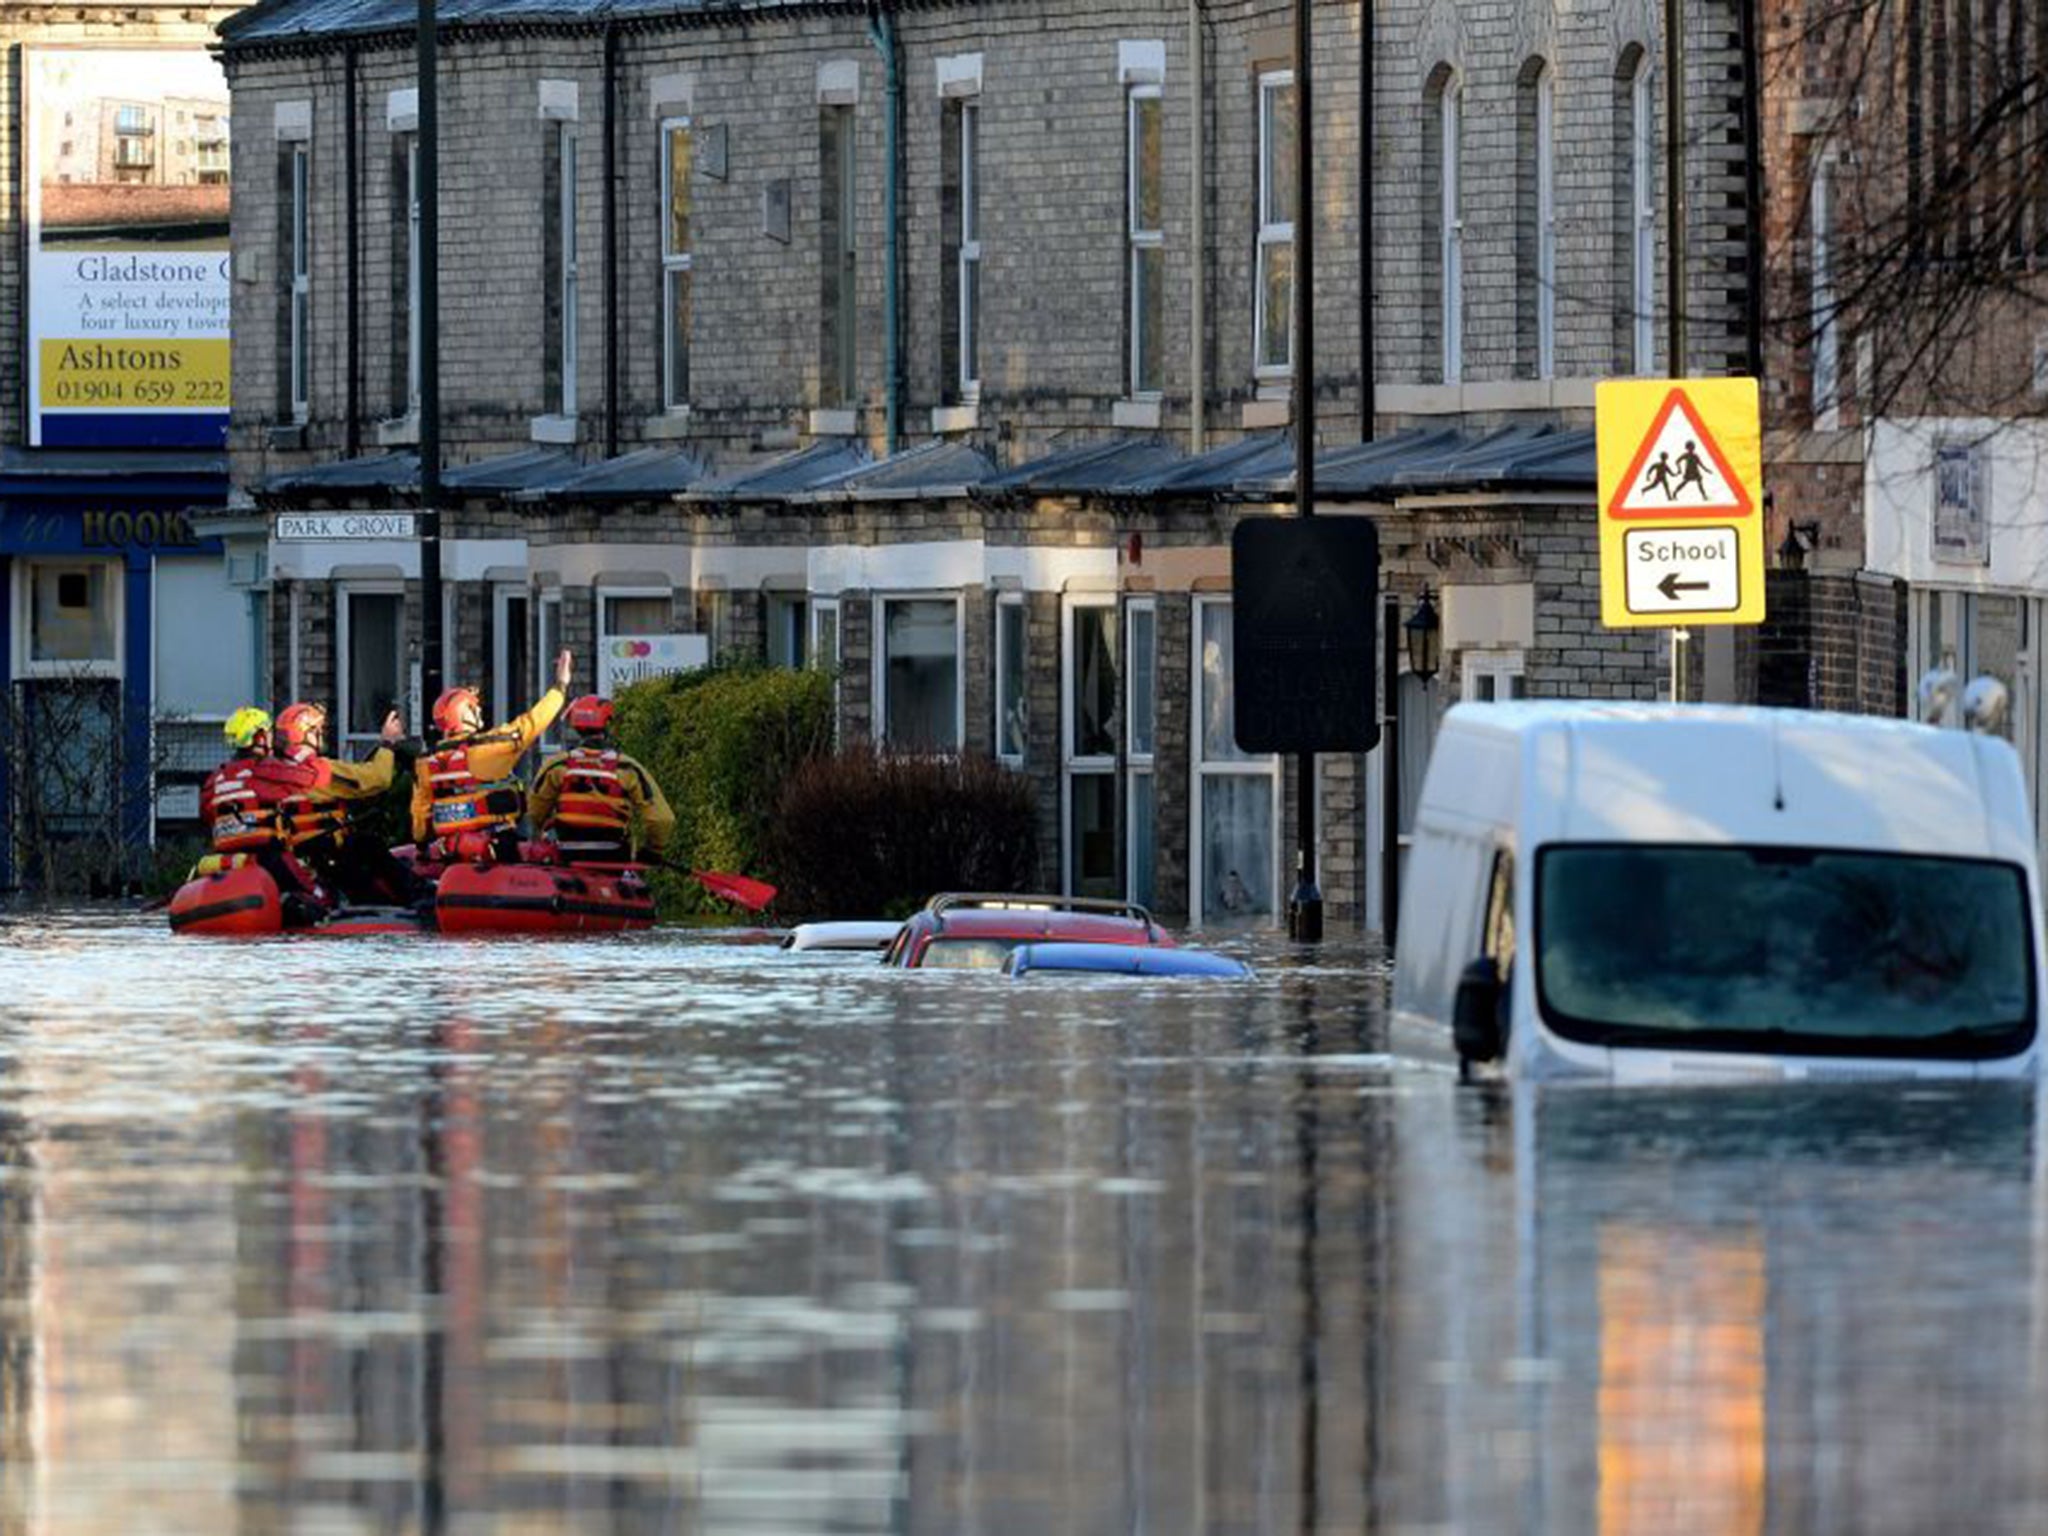 Members of a Mountain Rescue team paddle along Huntington Road in York, after the River Foss and Ouse burst their banks.